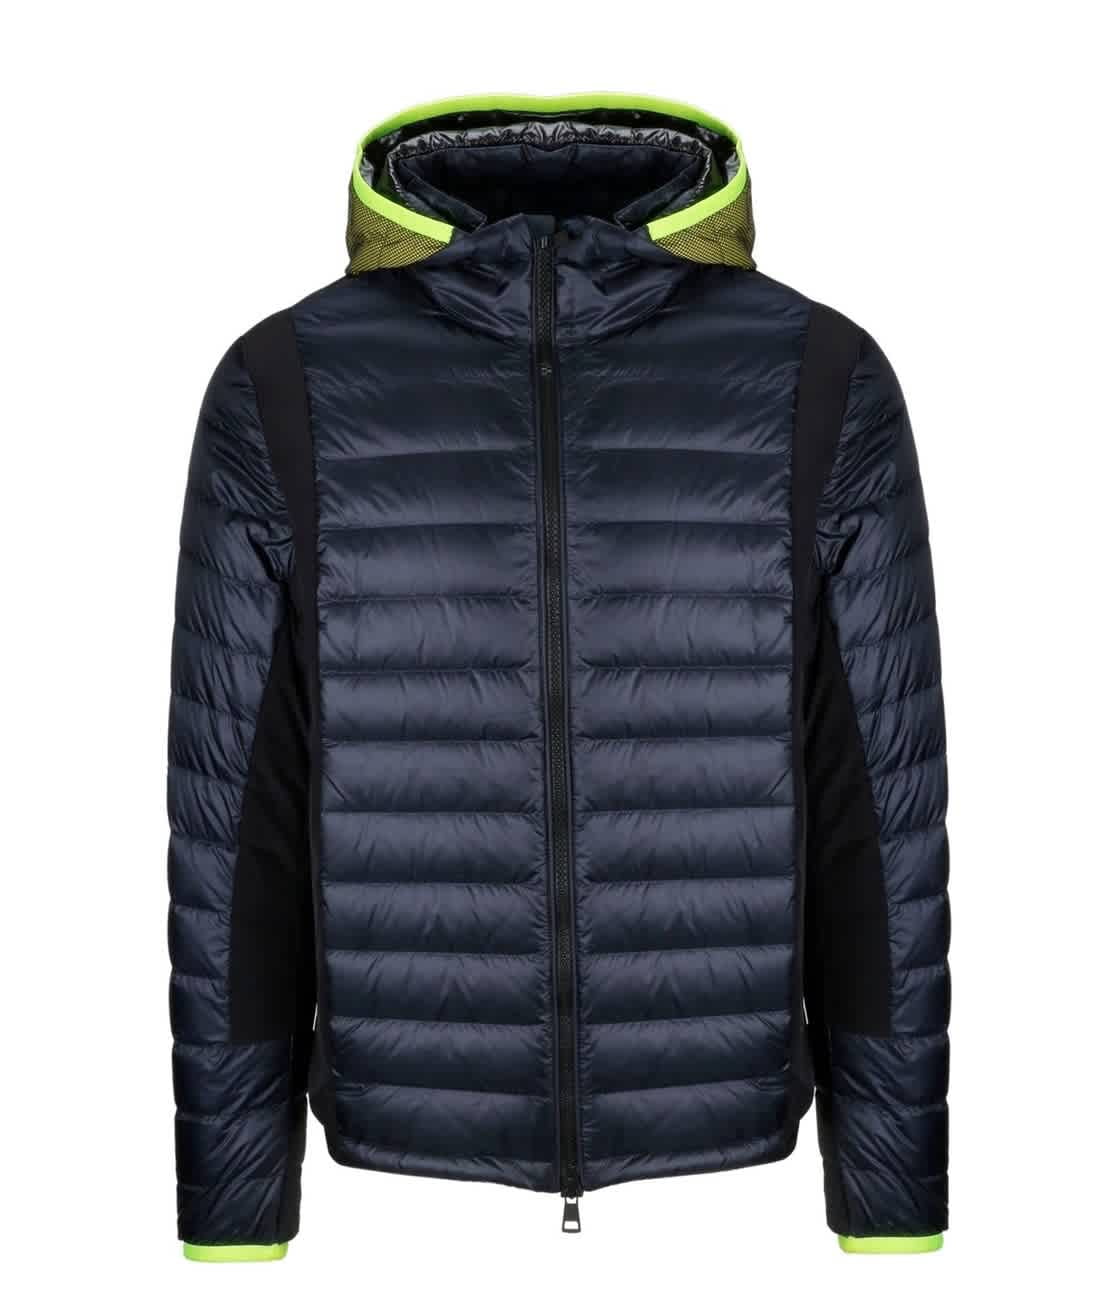 moncler hood replacement